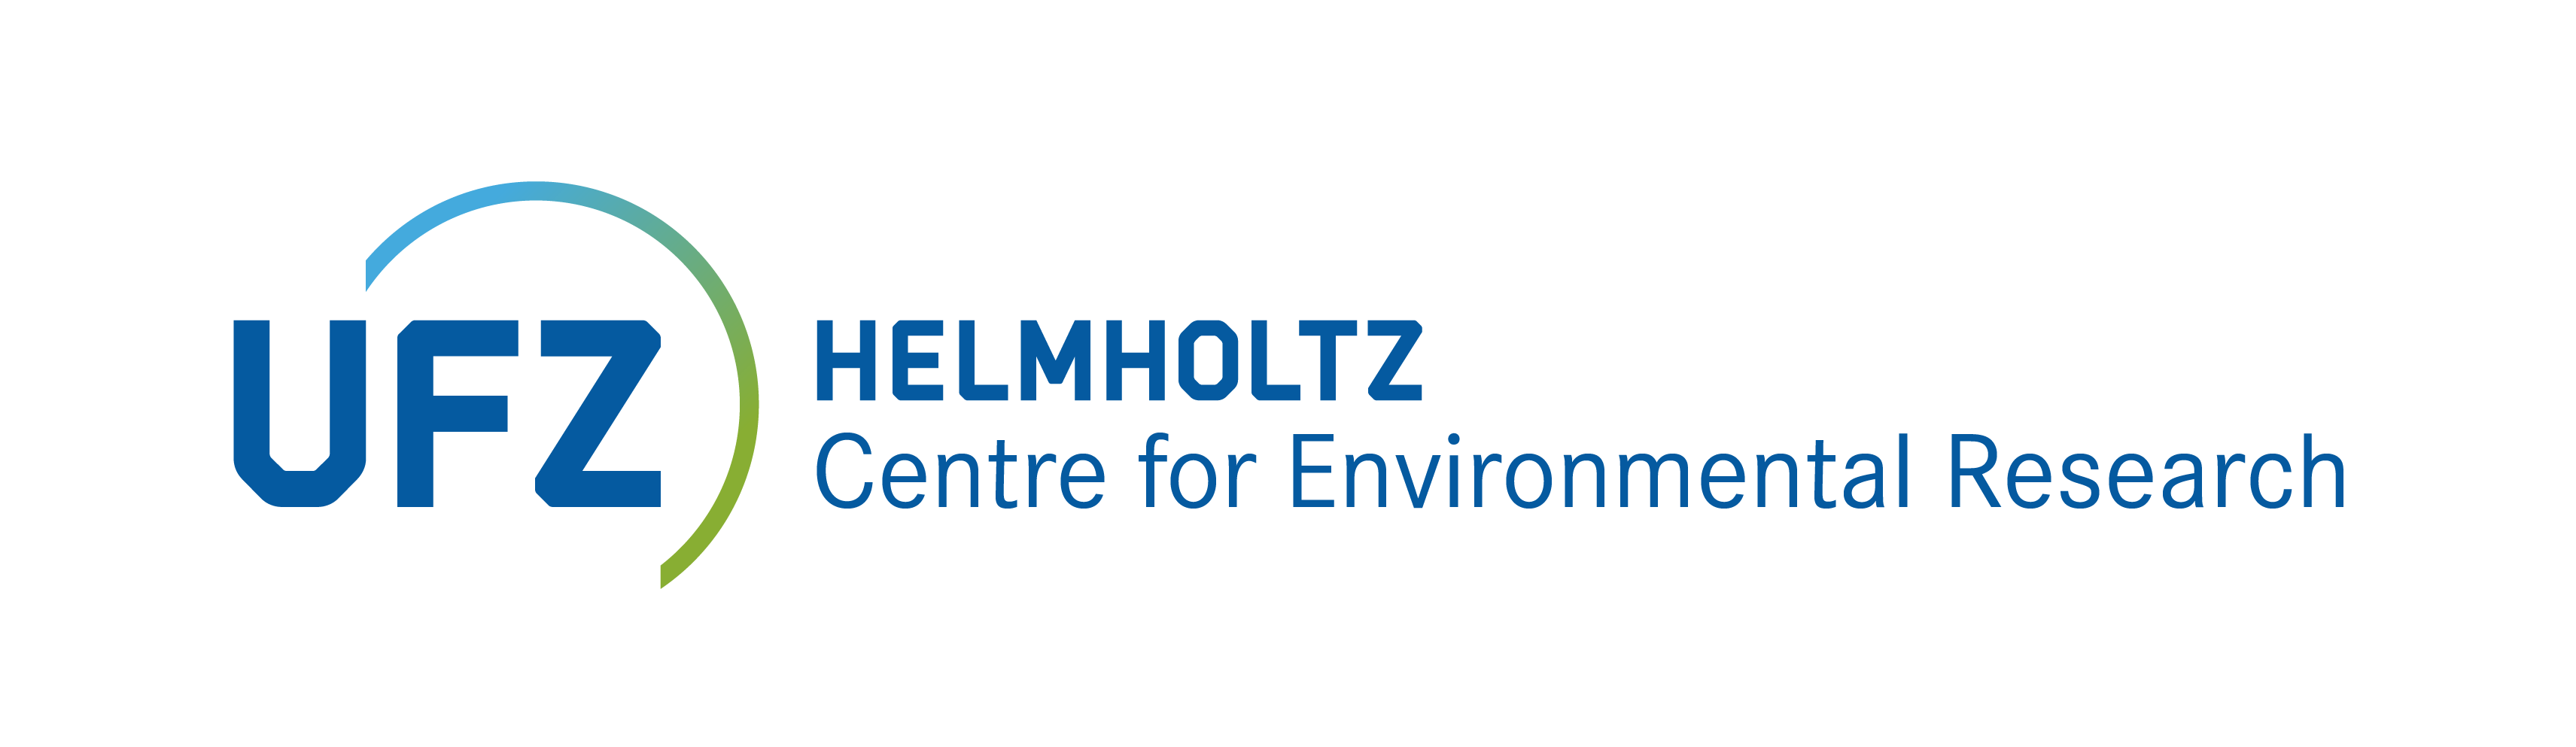 Helmholtz Centre of Environmental Research